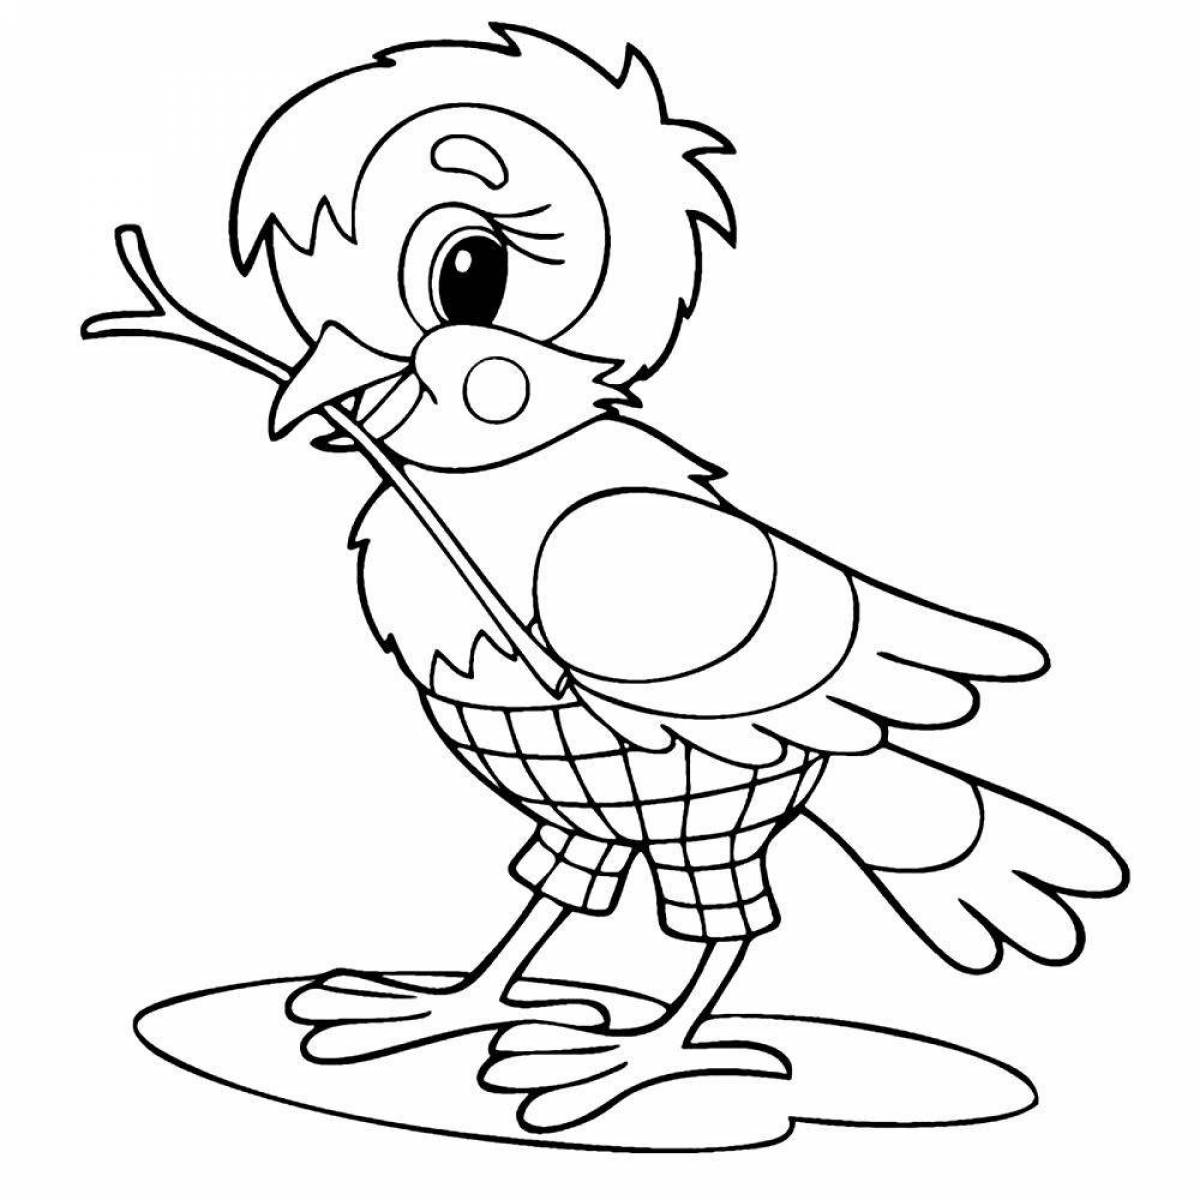 Animated sparrow coloring book for kids